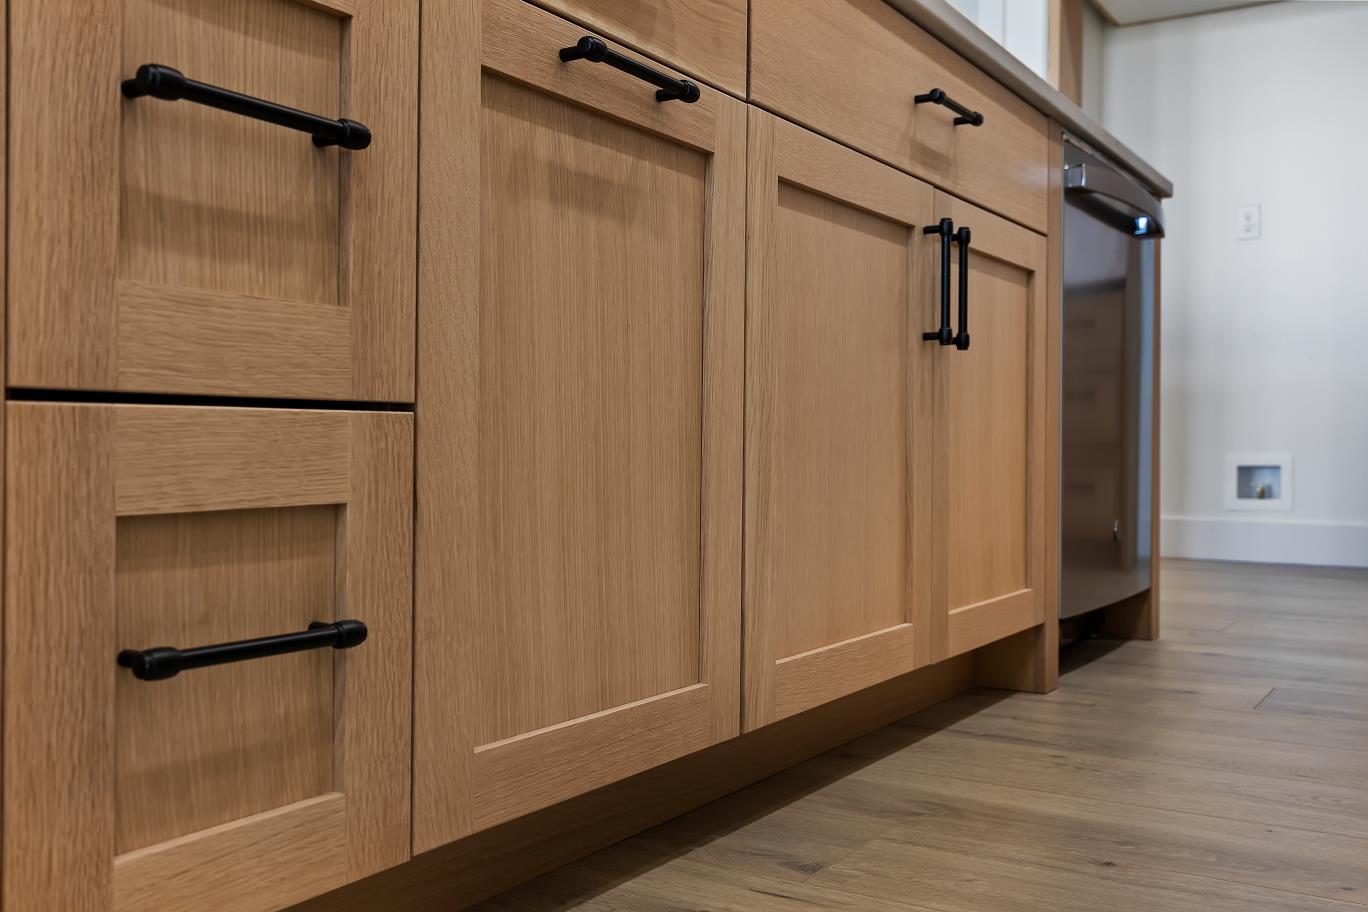 Featured image for “6 Benefits of Adding Custom Cabinetry Into Your Space”